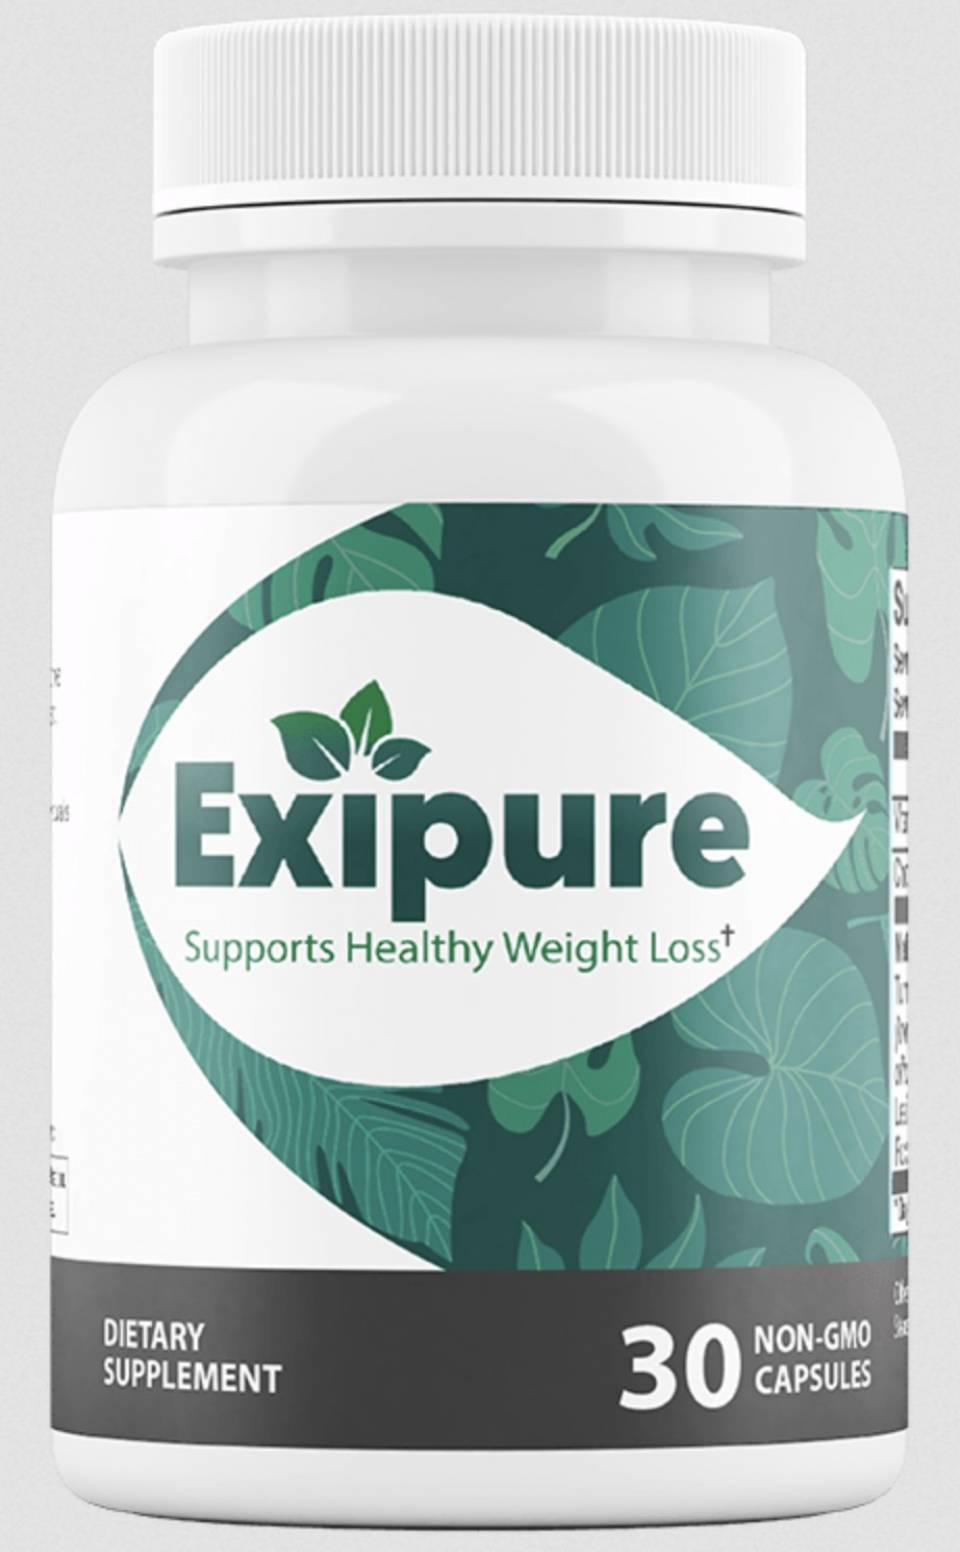 Exipure Sold Near Me